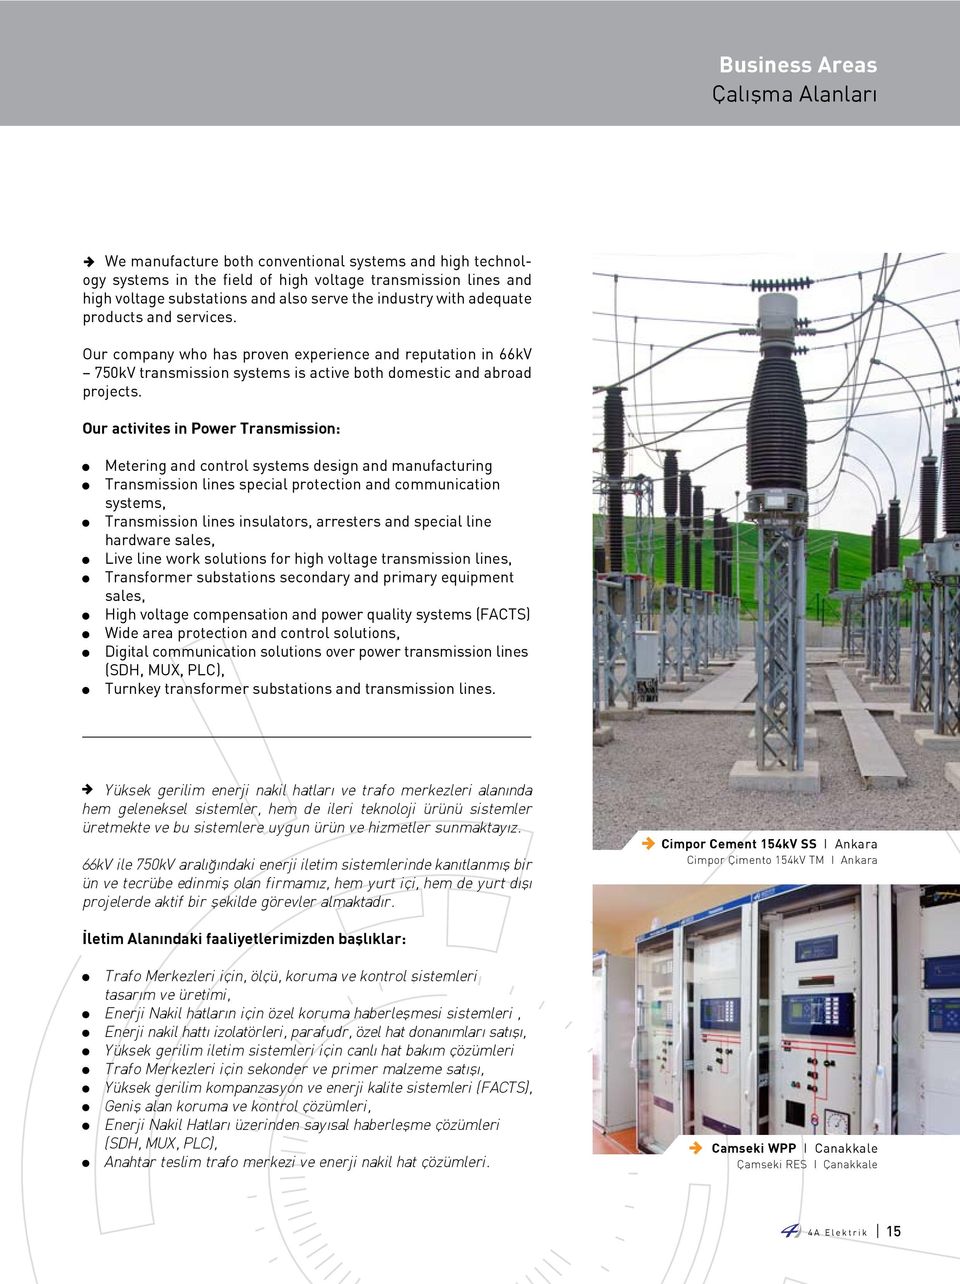 Our activites in Power Transmission: Metering and control systems design and manufacturing Transmission lines special protection and communication systems, Transmission lines insulators, arresters